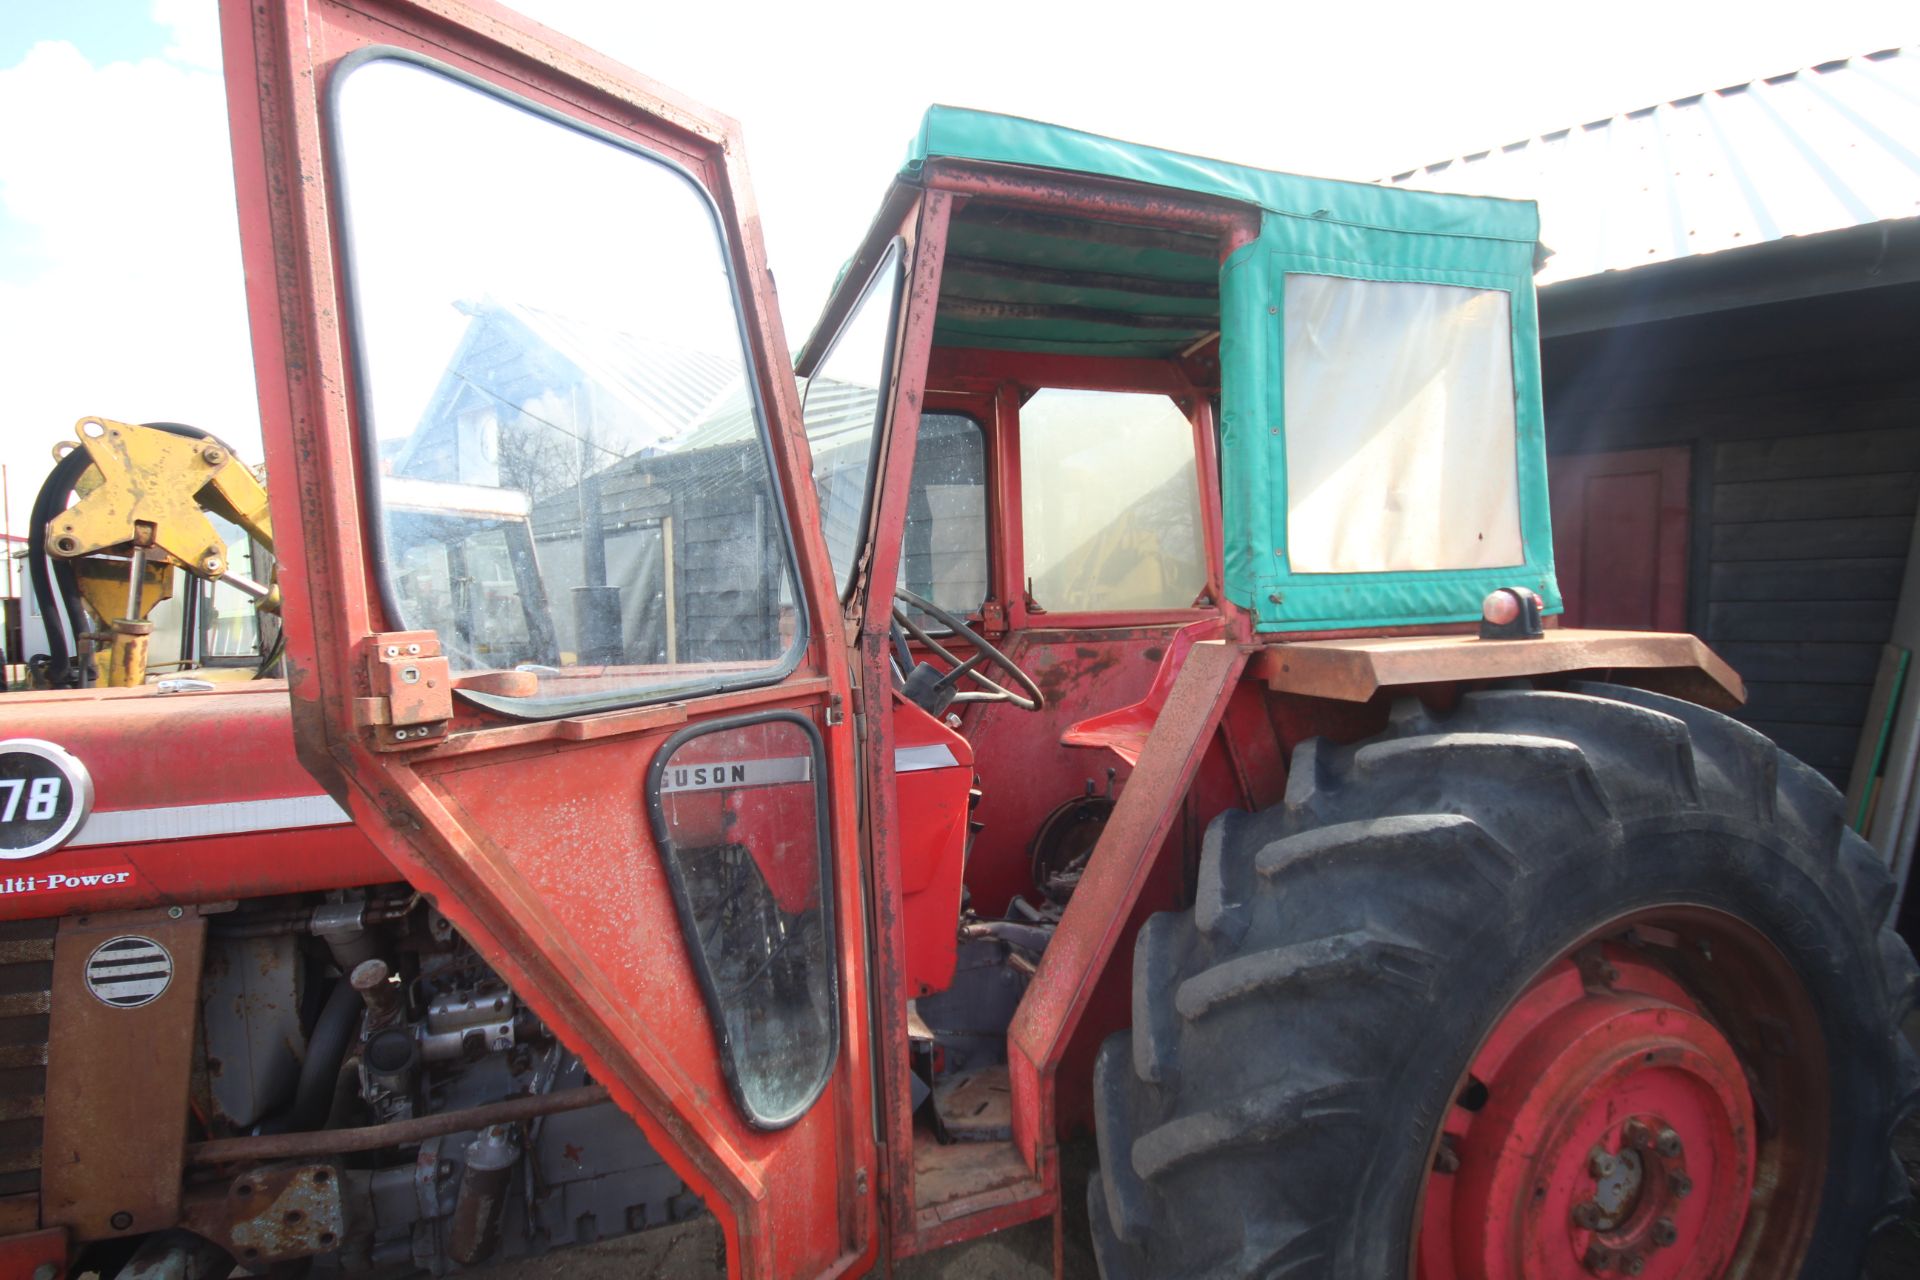 Massey Ferguson 178 Multi-Power 2WD tractor. Registration GWC 408H. Date of first registration 16/ - Image 41 of 56